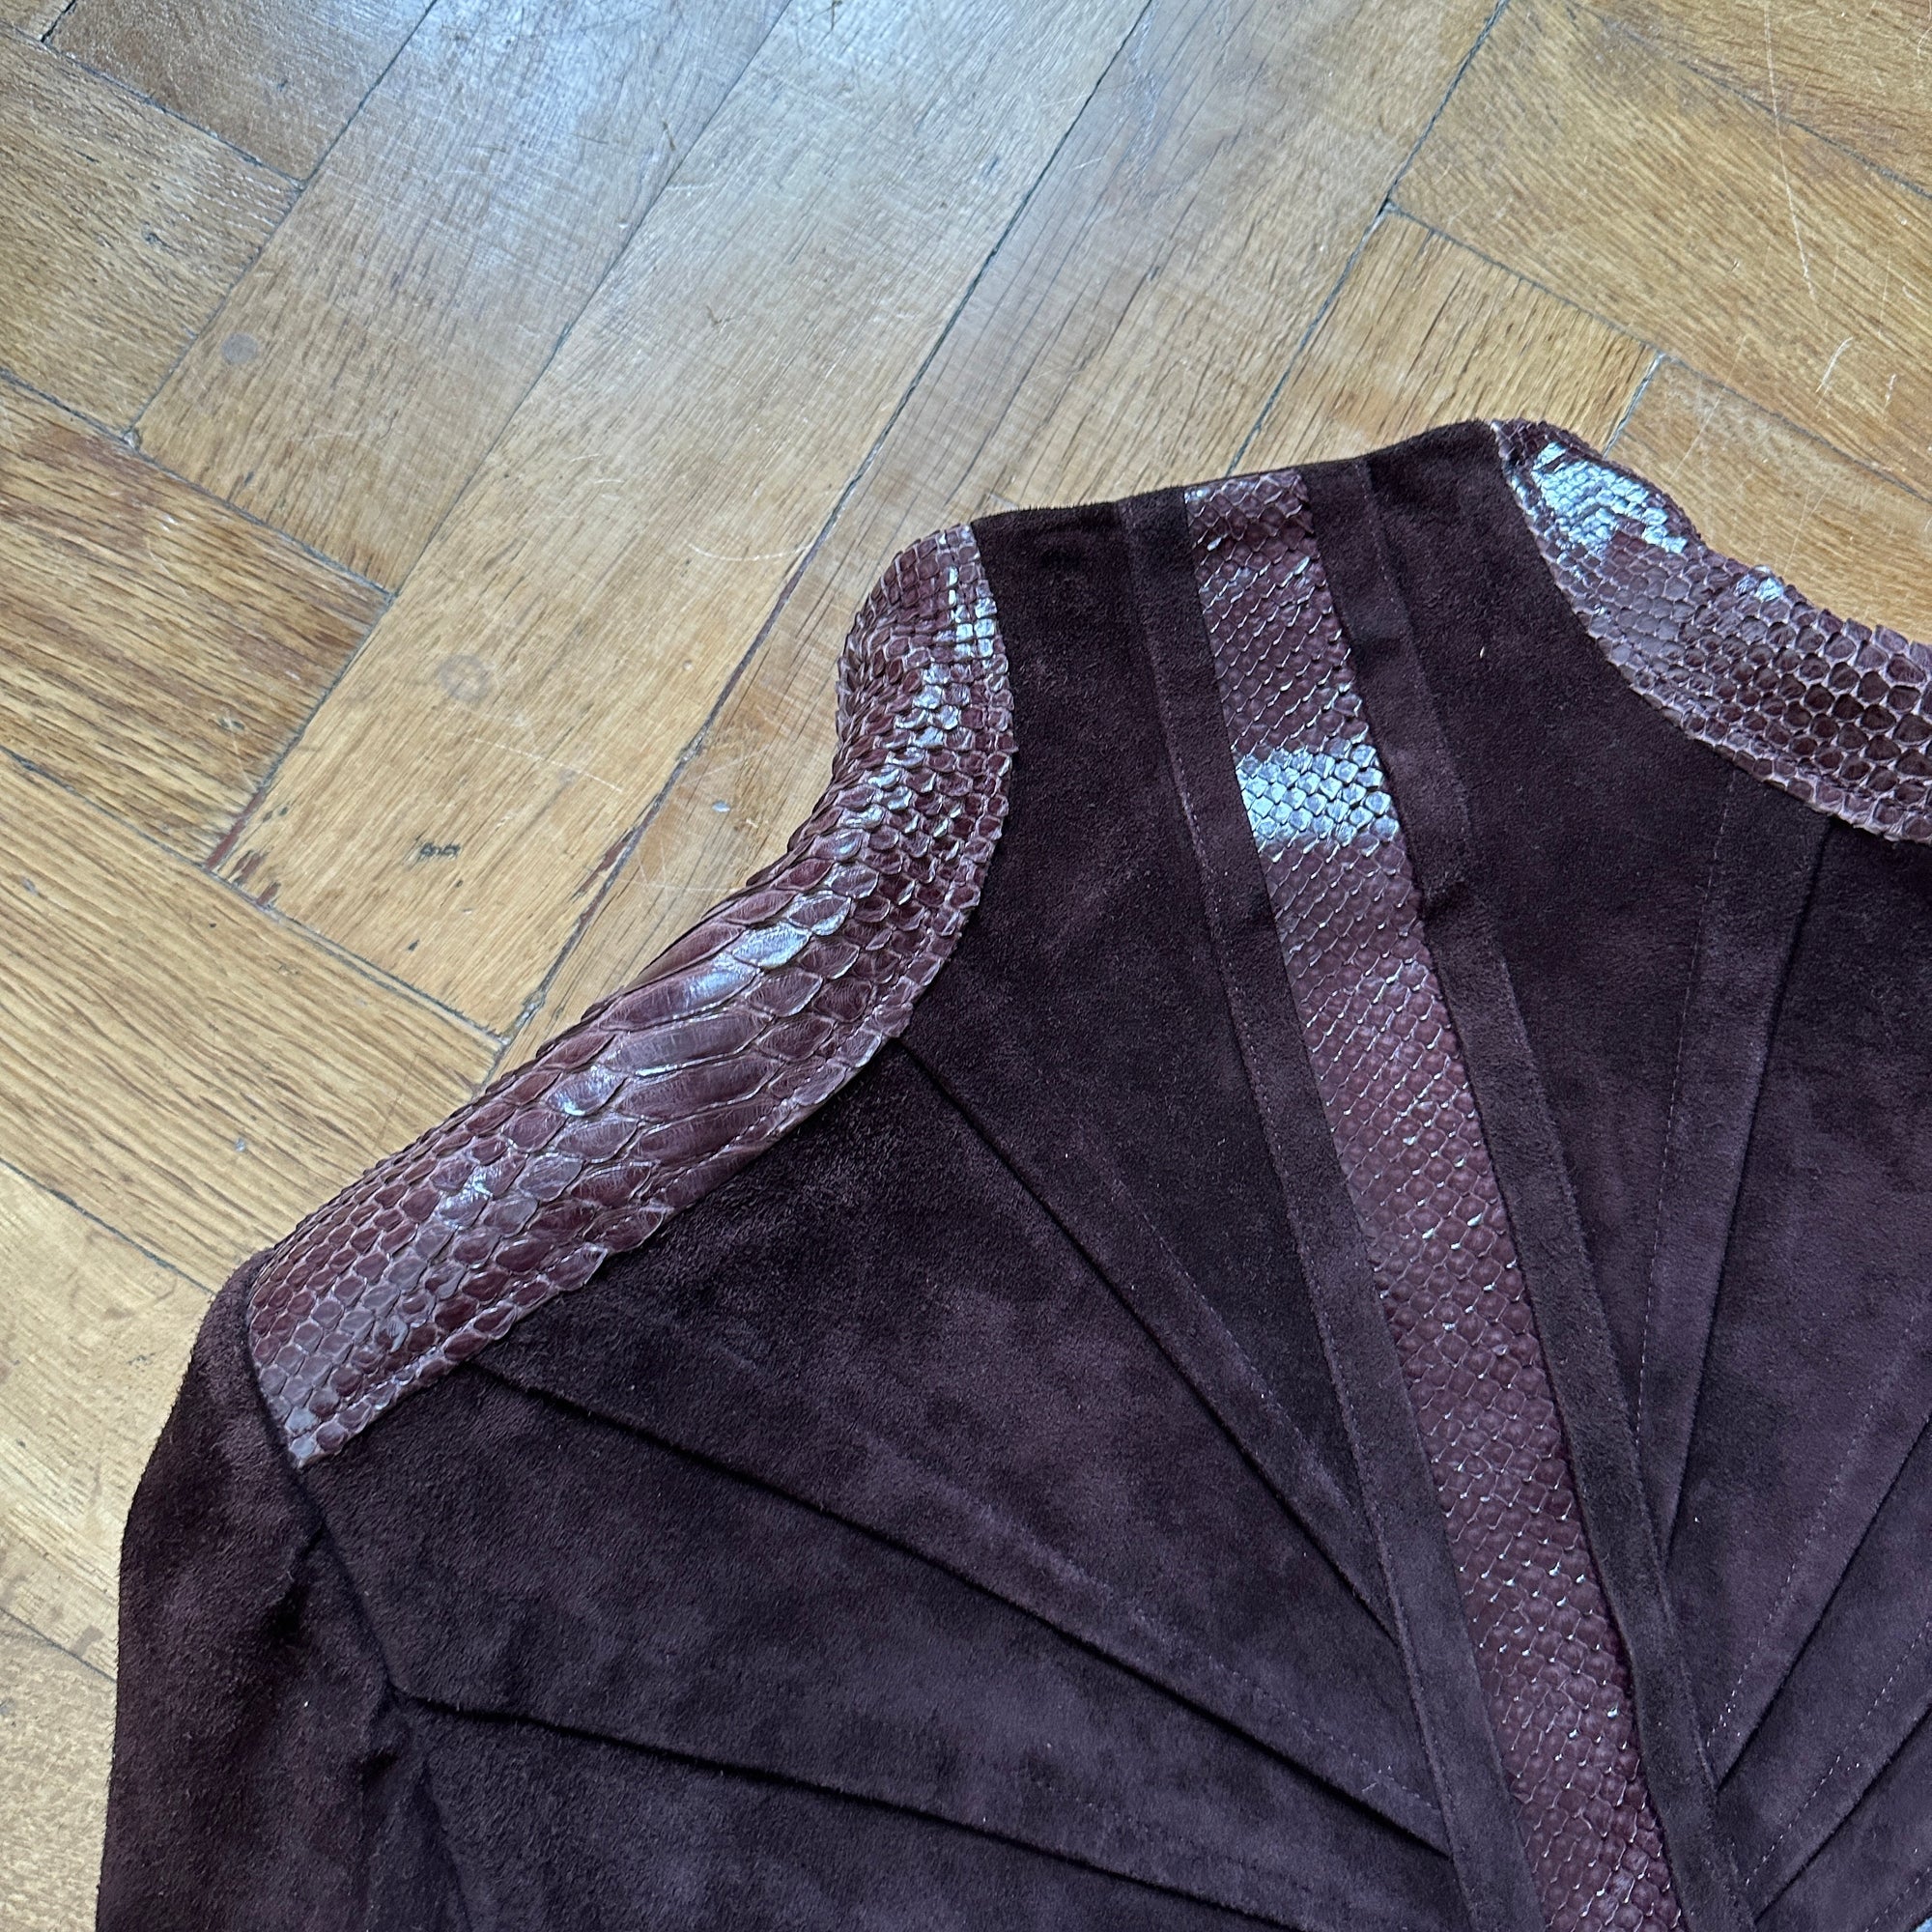 Gucci by Tom Ford SS04 Python Suede Paneled Jacket